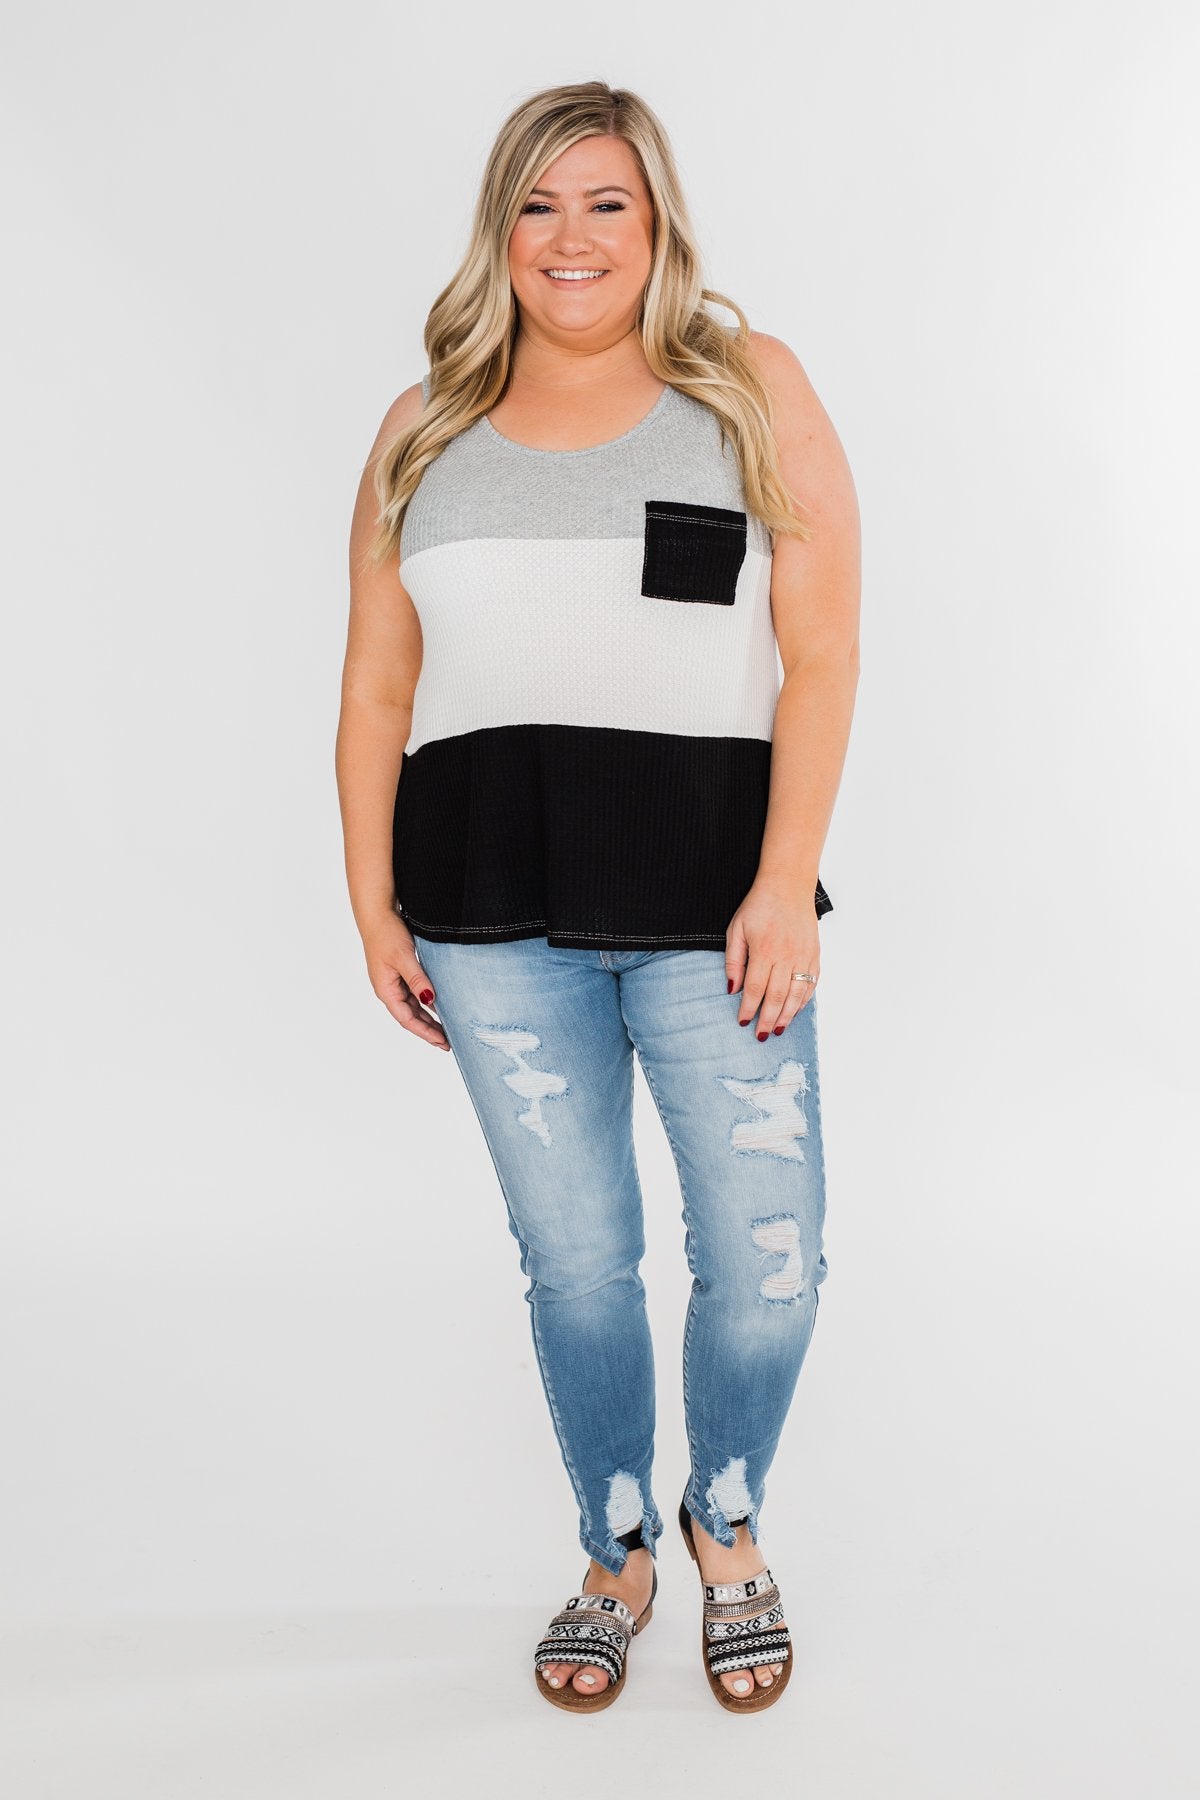 Waffle Knit Color Block Tank Top- Black, Grey, and White